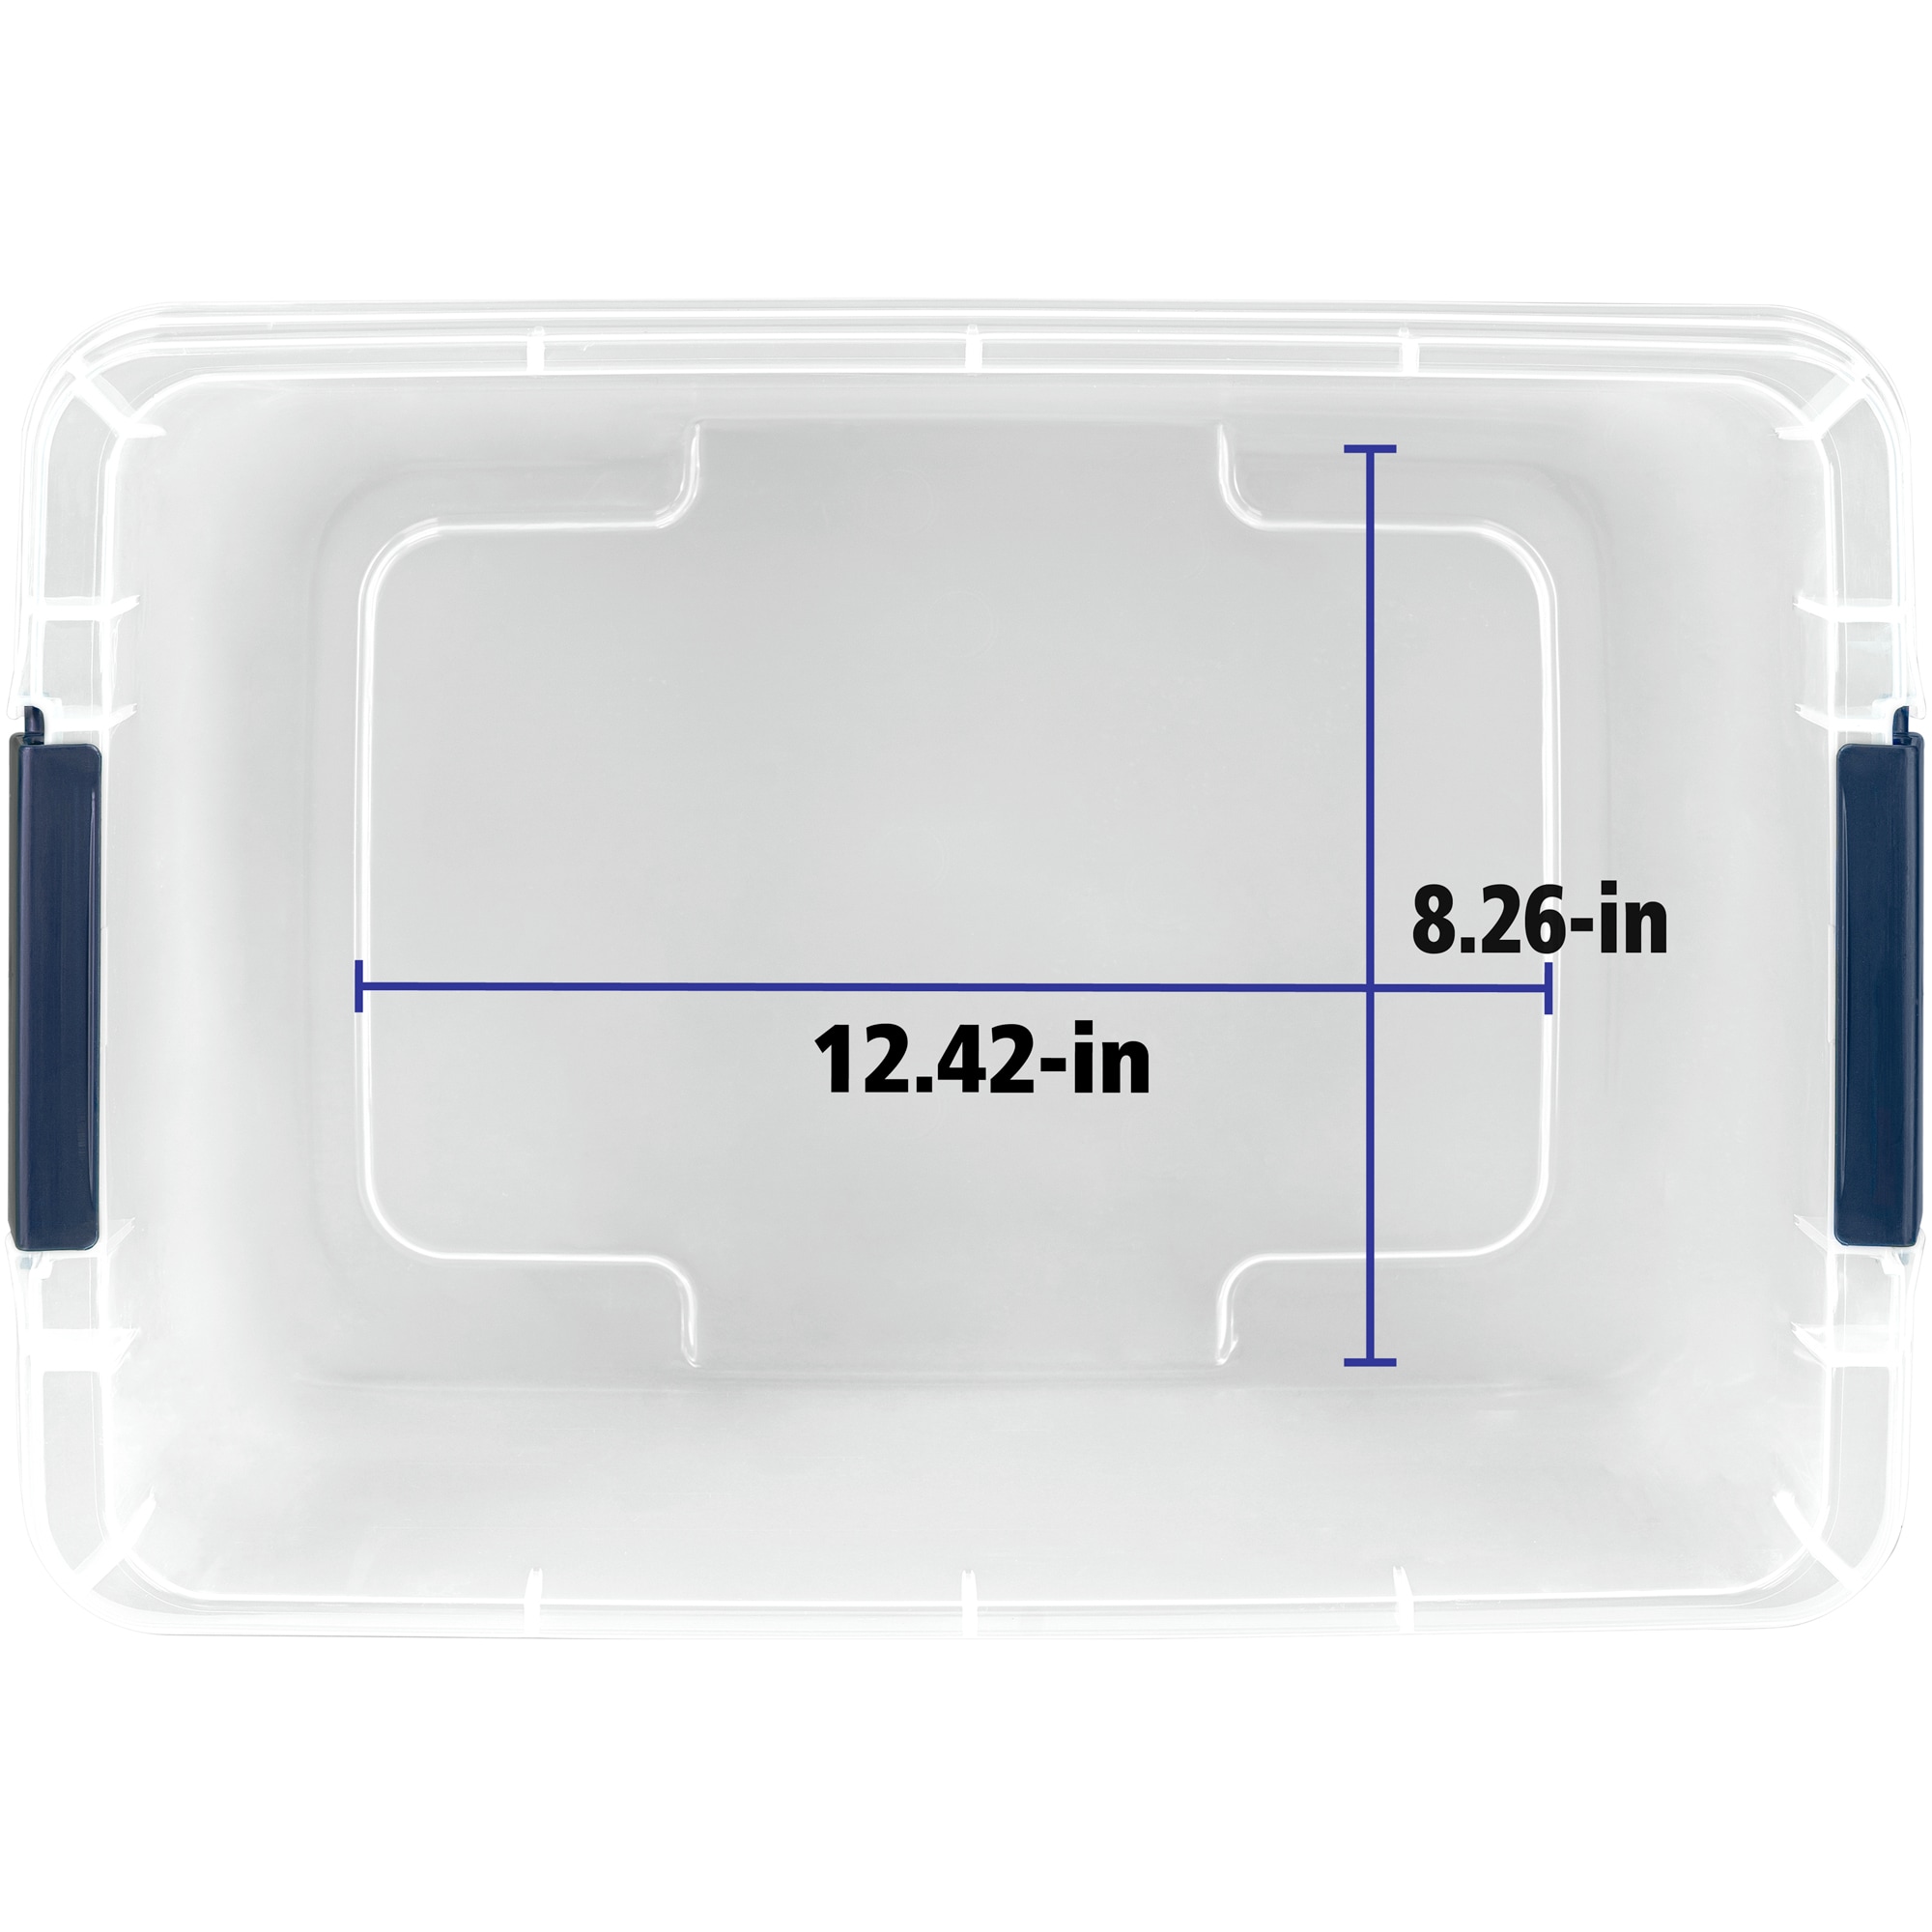 Project Source Small 1.625-Gallons (6.5-Quart) Clear, White Tote with Latching Lid | 7249LWS-010-000-759